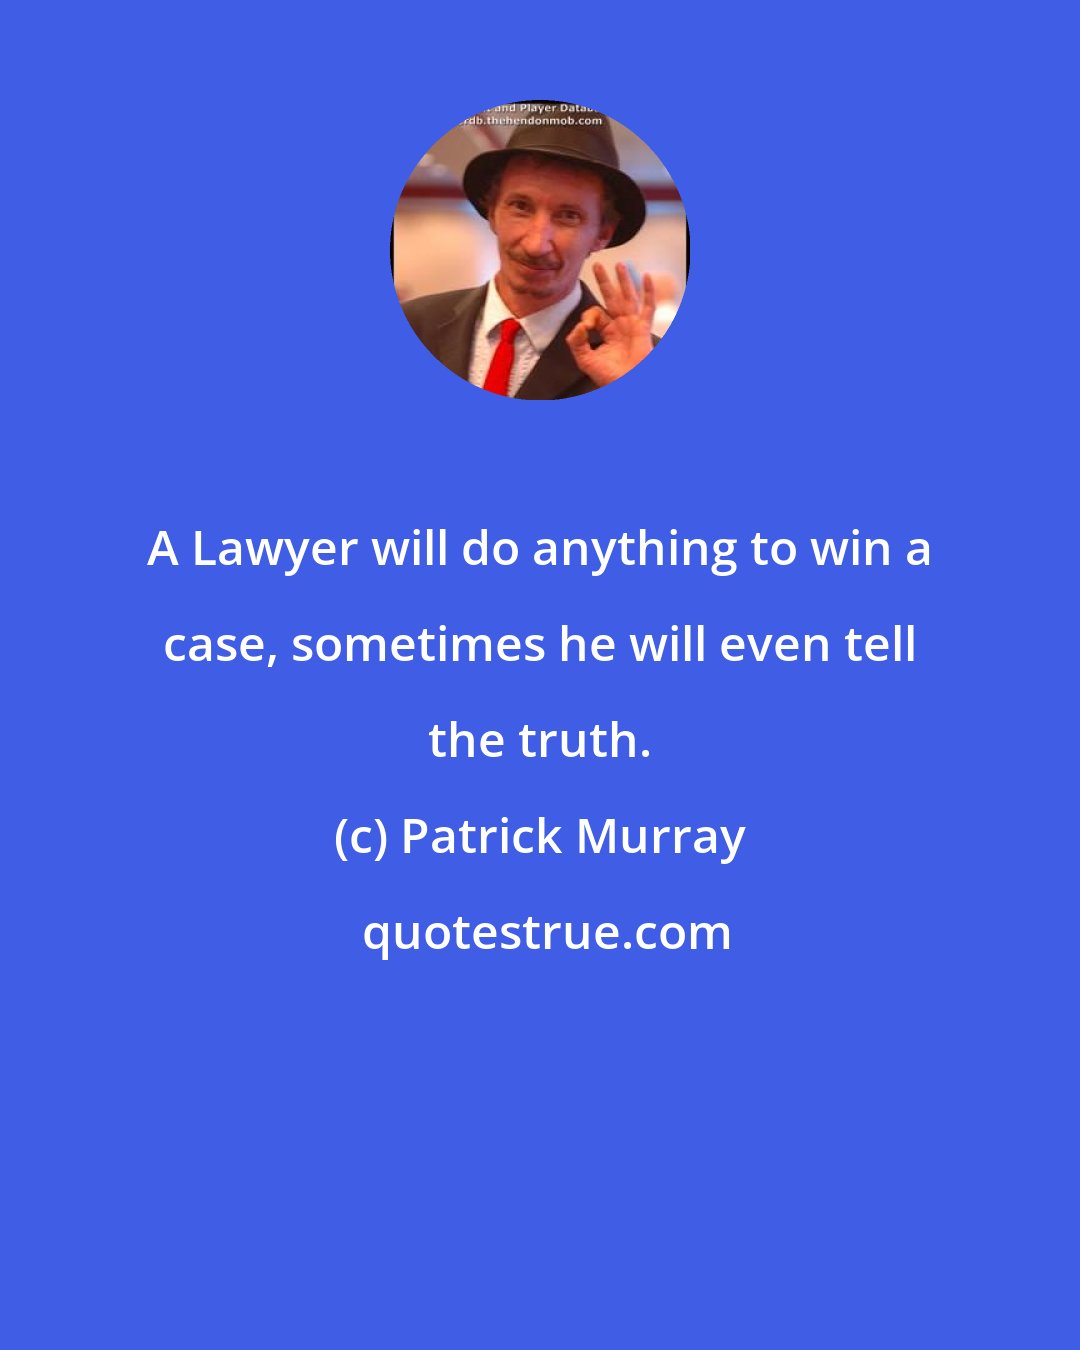 Patrick Murray: A Lawyer will do anything to win a case, sometimes he will even tell the truth.